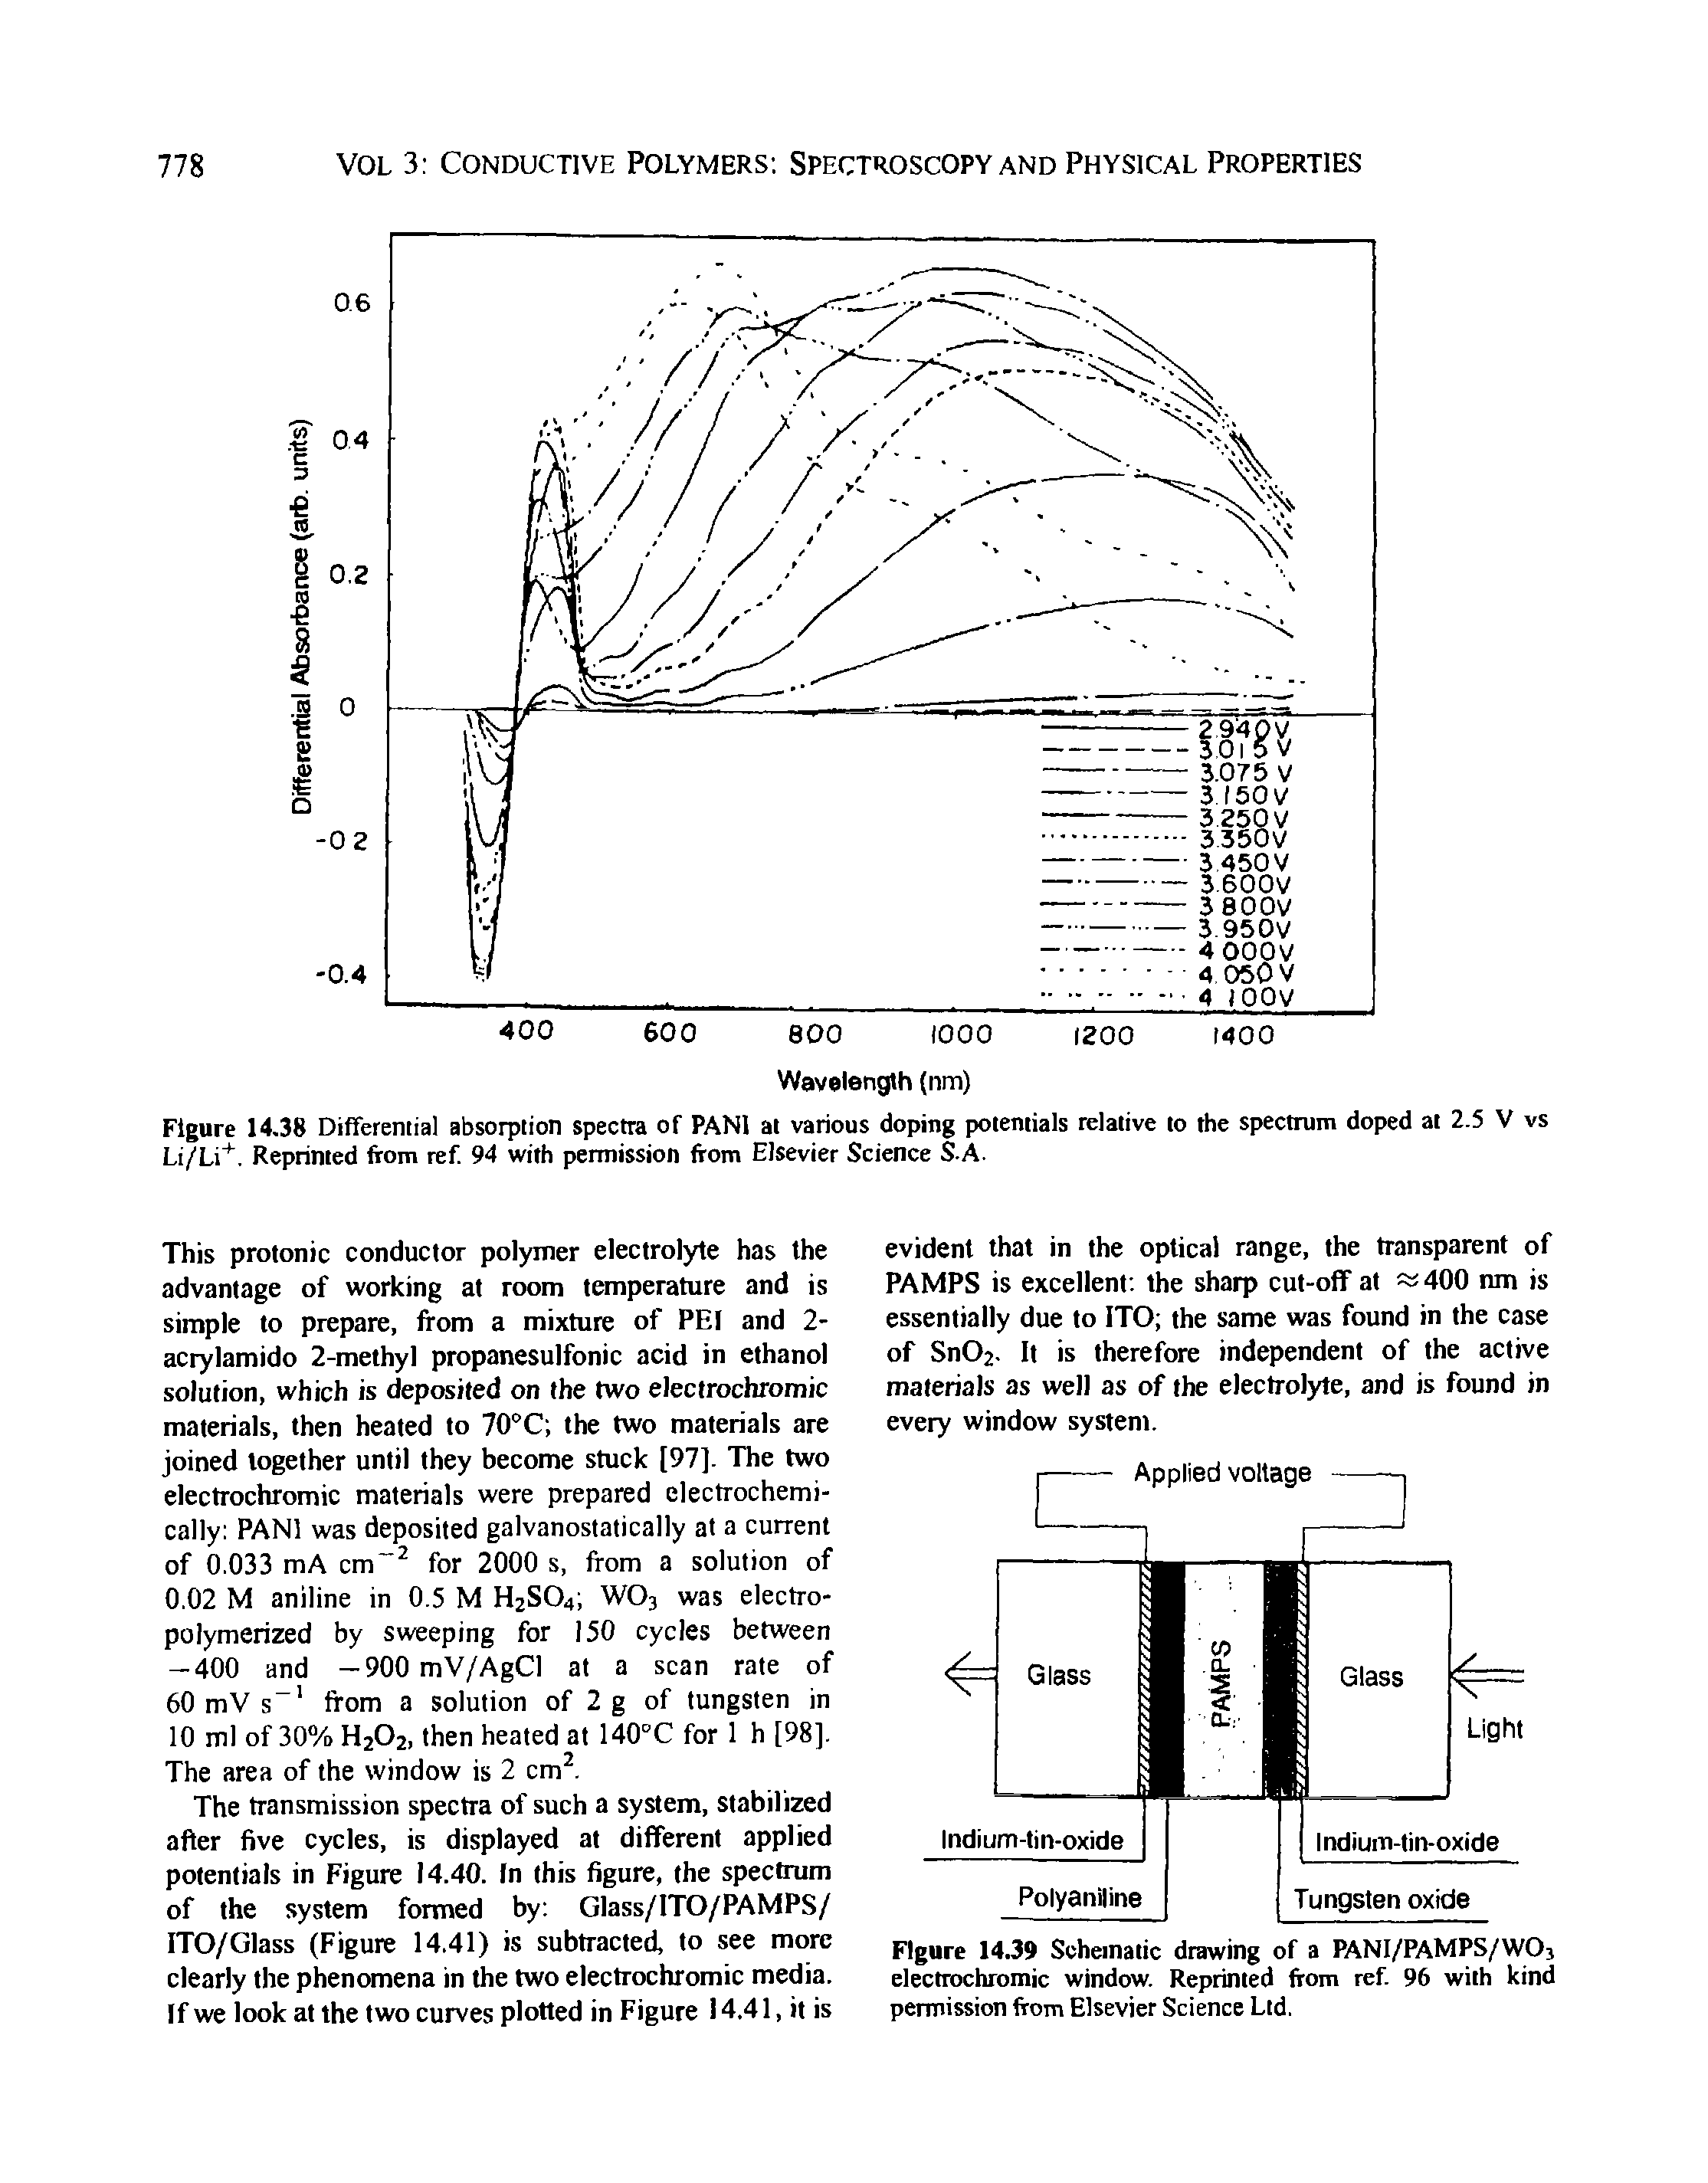 Figure 14.39 Schematic drawing of a PANI/PAMPS/WO3 electrochromic window. Reprinted from ref 96 with kind permission from Elsevier Science Ltd.